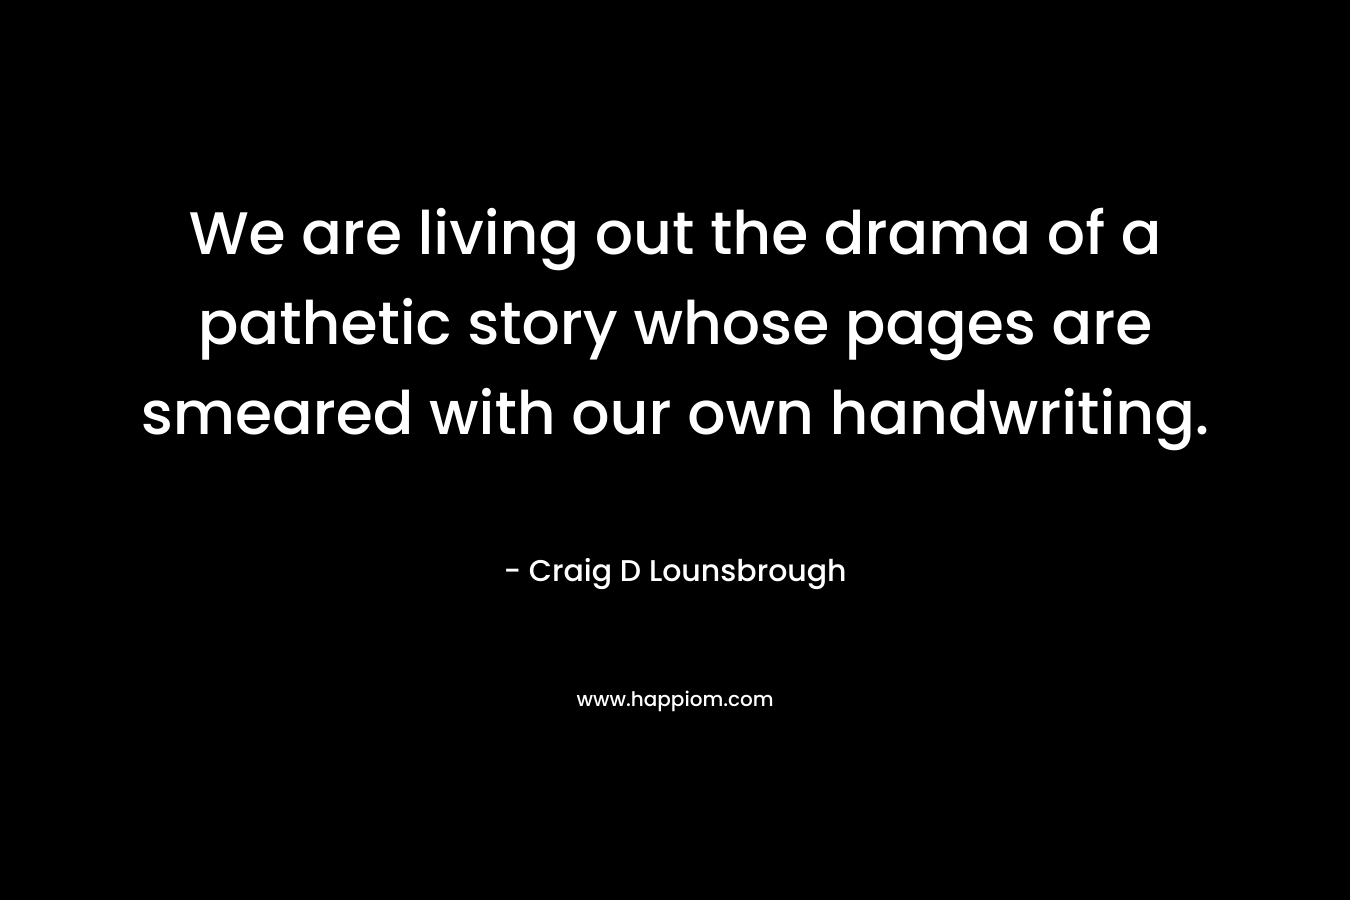 We are living out the drama of a pathetic story whose pages are smeared with our own handwriting. – Craig D Lounsbrough